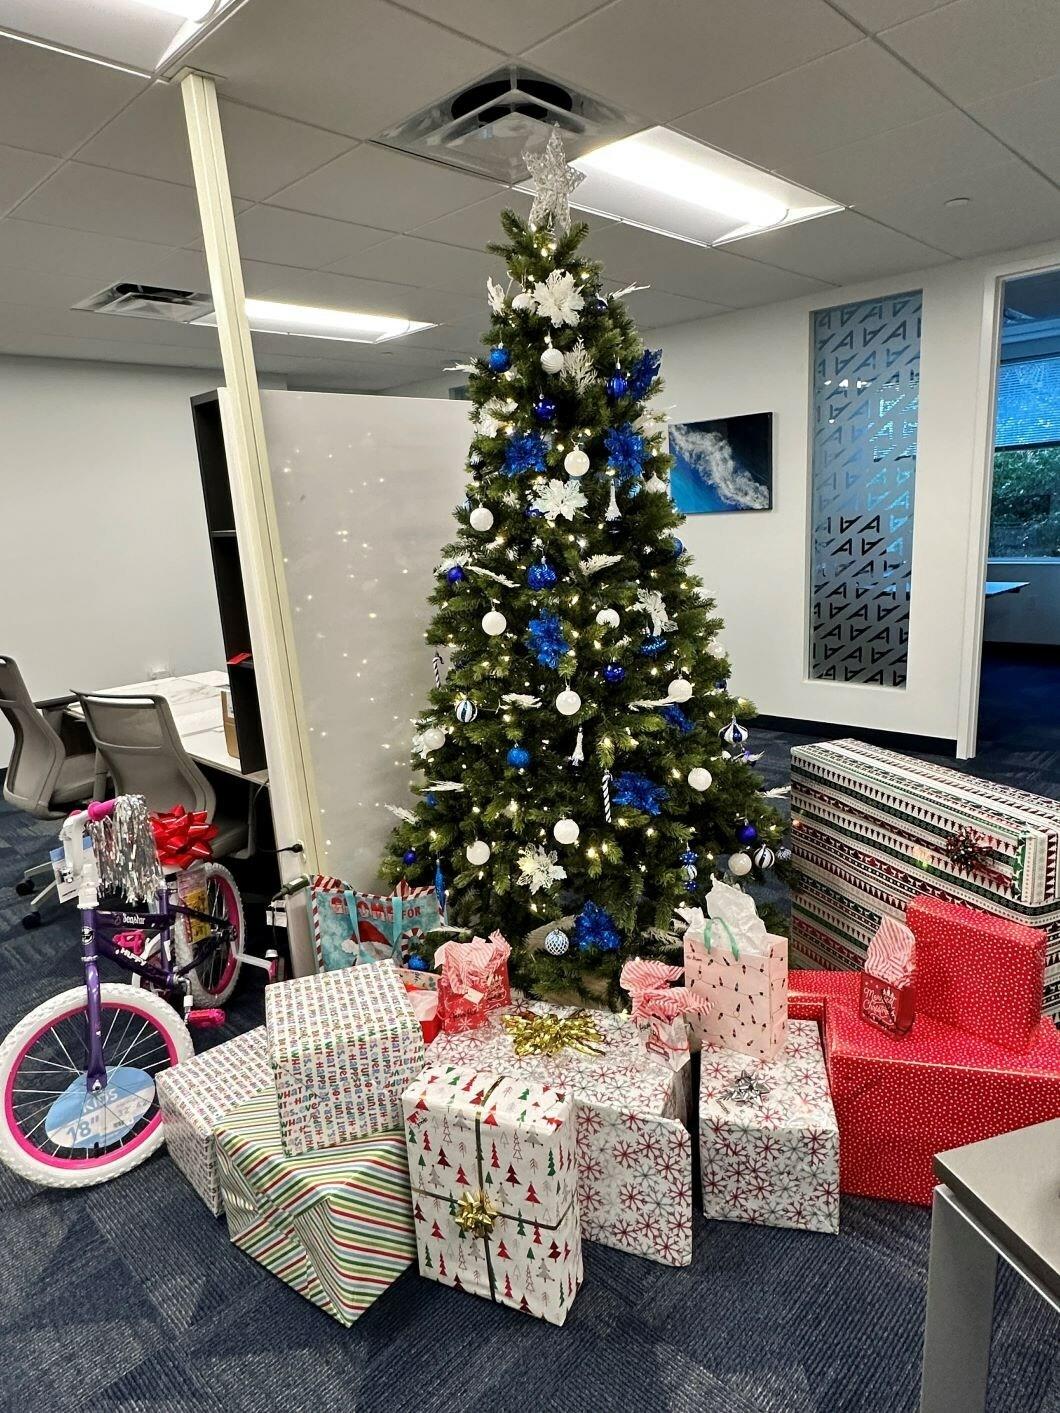 Akel Homes Embraces the Spirit of Giving, Bringing Holiday Magic to Families in Need